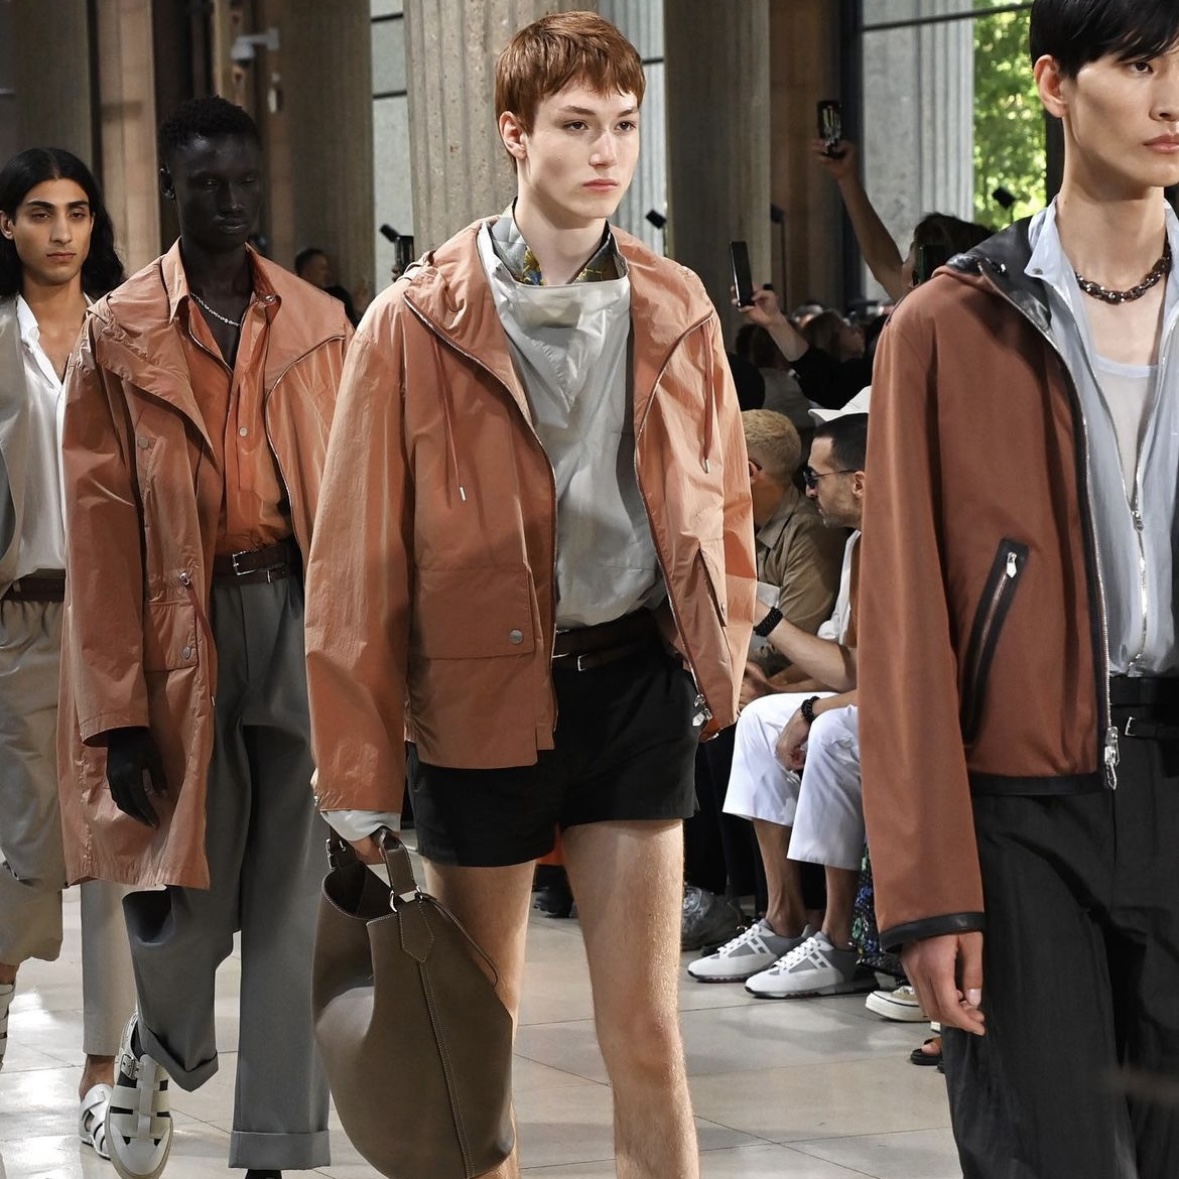 Hermès Delivers Timeless, Classic Luxury for FW19 Men's Collection |  Menswear, Mens winter fashion, Menswear runway